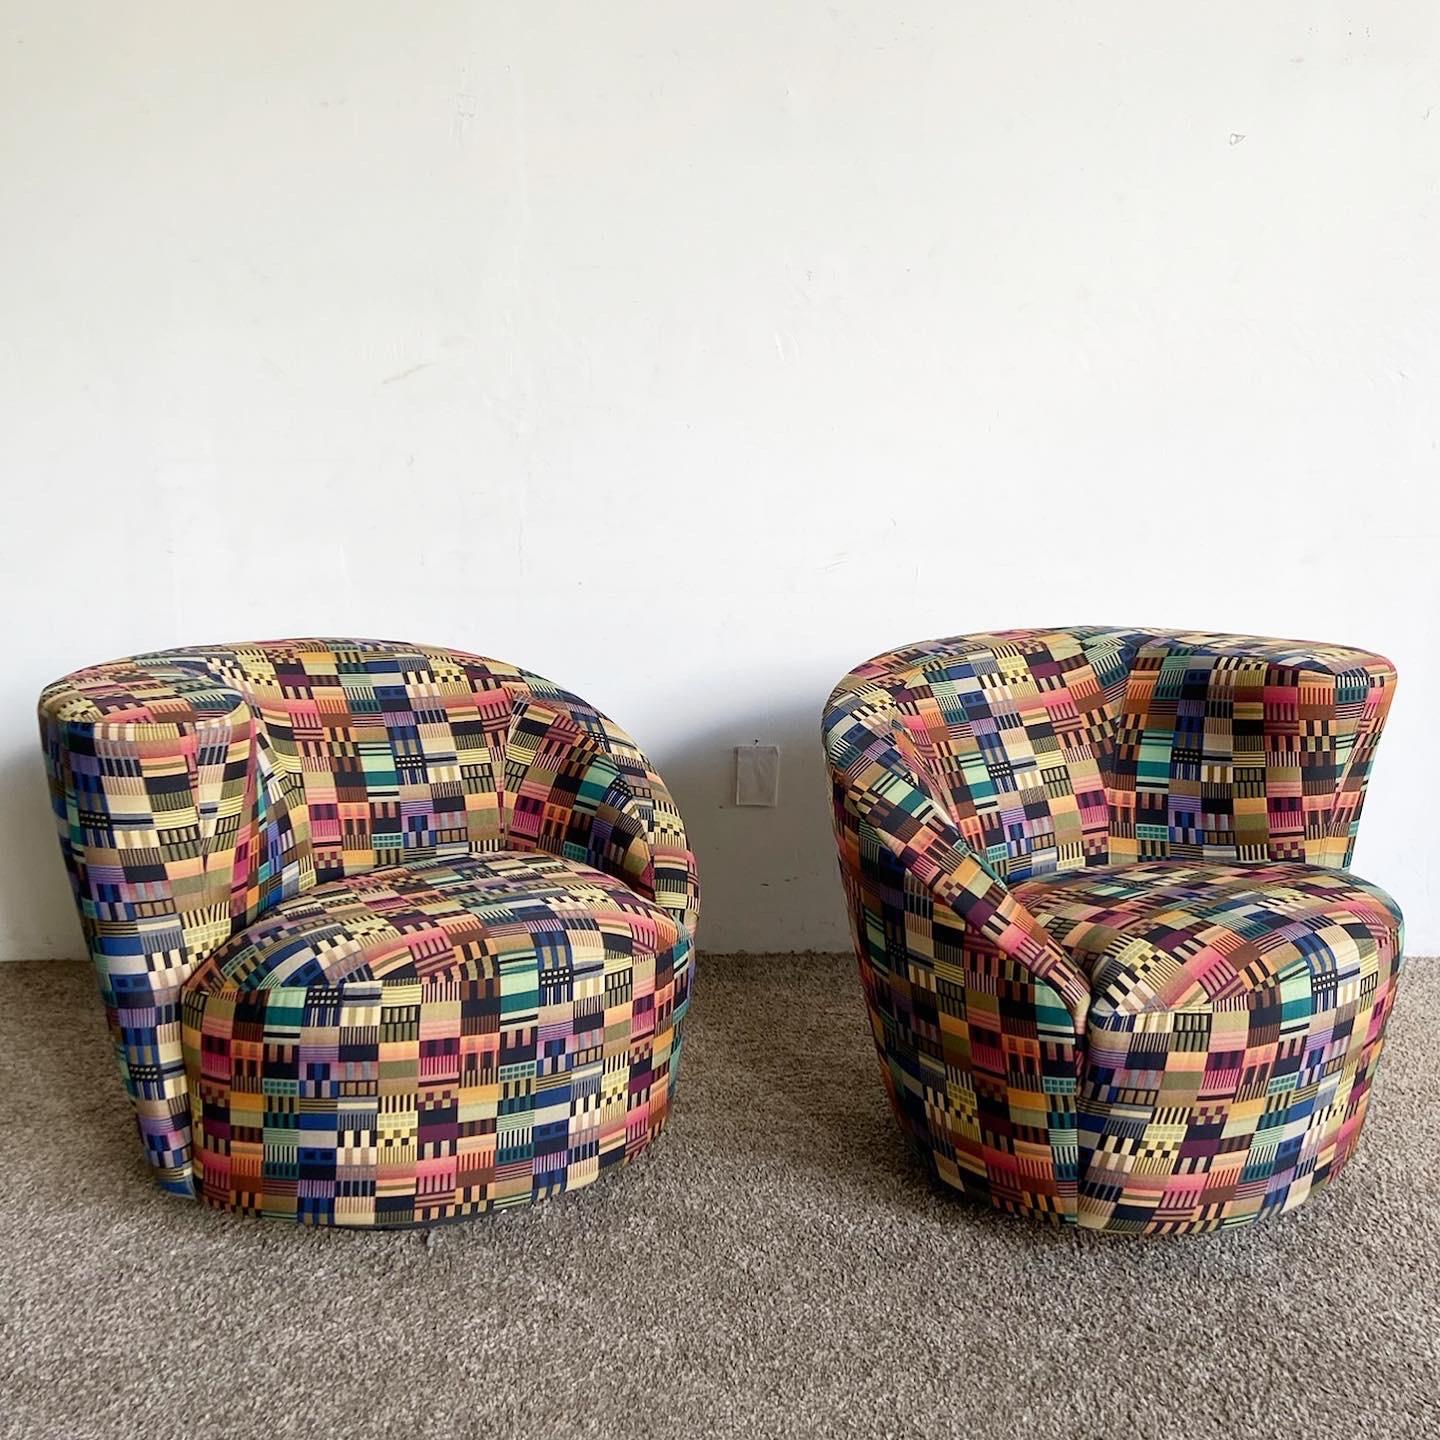 Experience a vibrant blend of comfort and design with our Postmodern Vladimir Kagan Style Multicolor Nautilus Swivel Chairs. This pair showcases a kaleidoscopic fabric pattern in a spectrum of rainbow hues, intertwined with abstract black